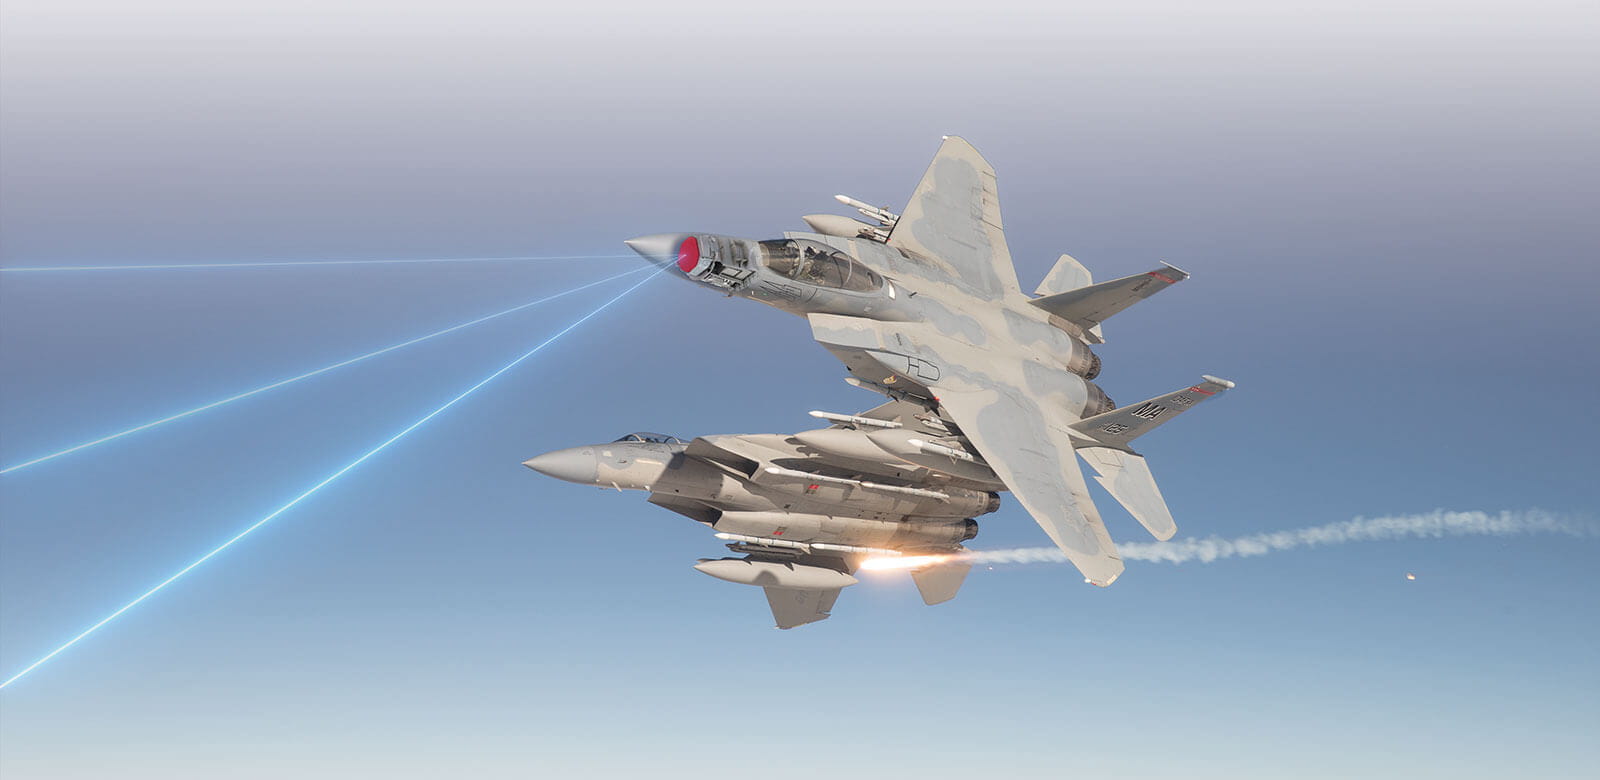 An artistic rendition of jets with radars, showing lasers to represent tracking.